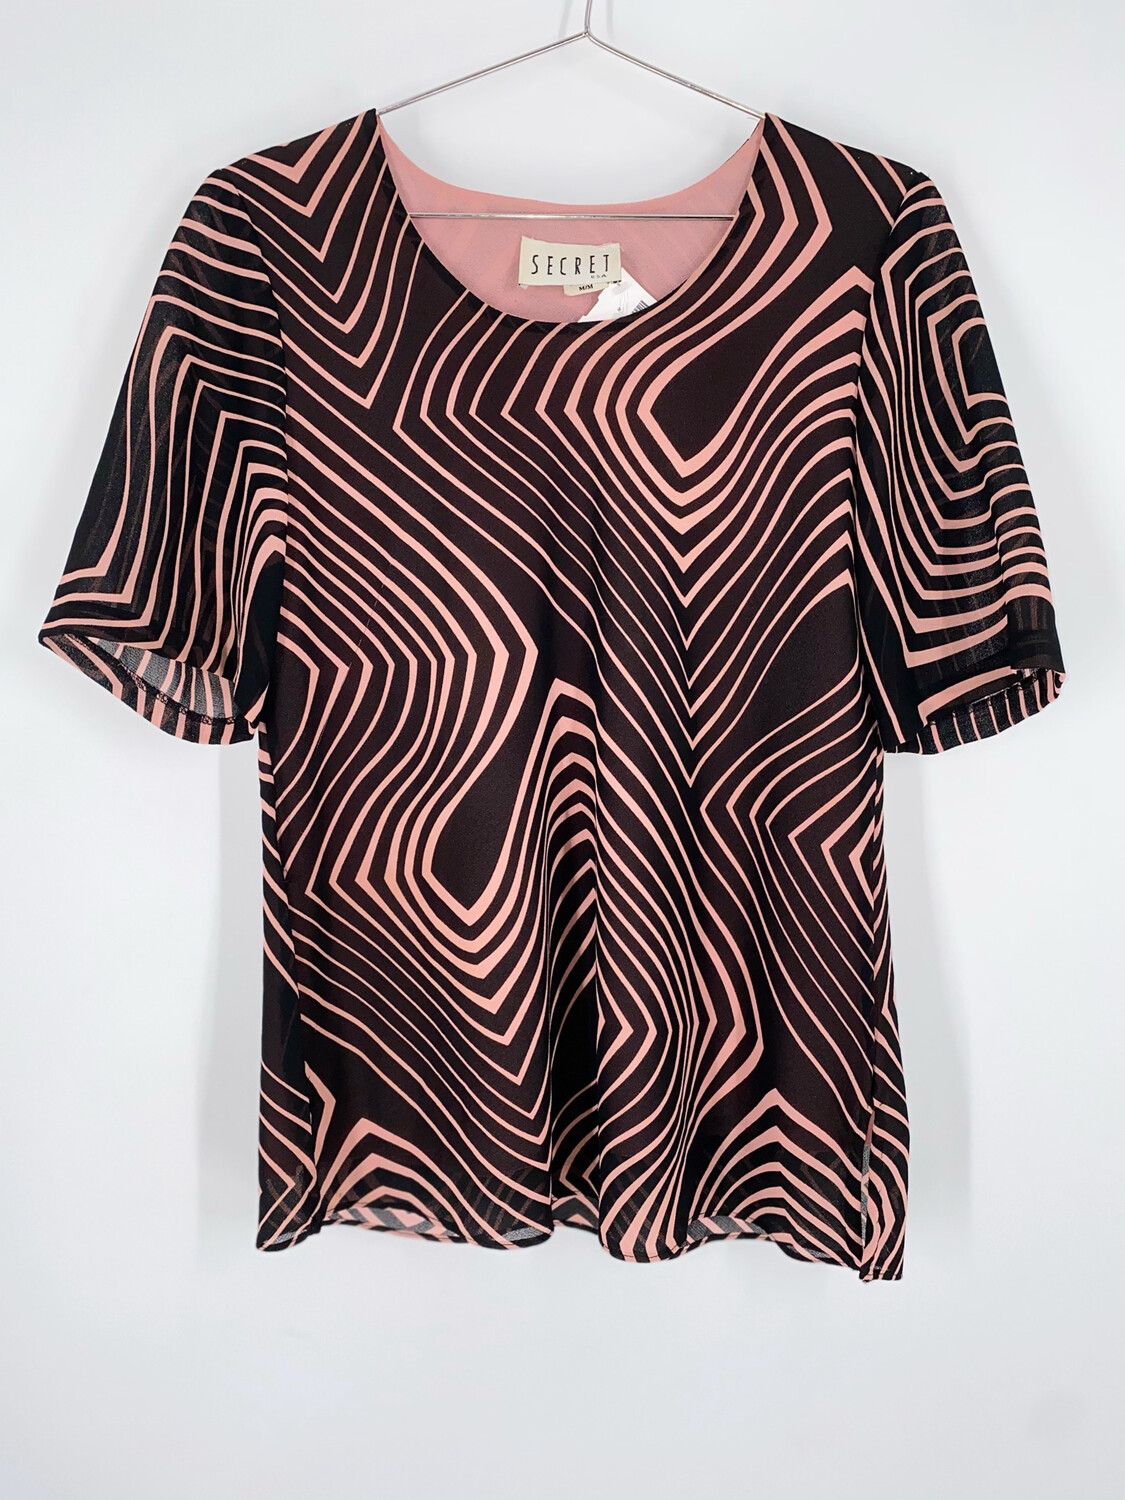 Secret Abstract Striped Top Size M